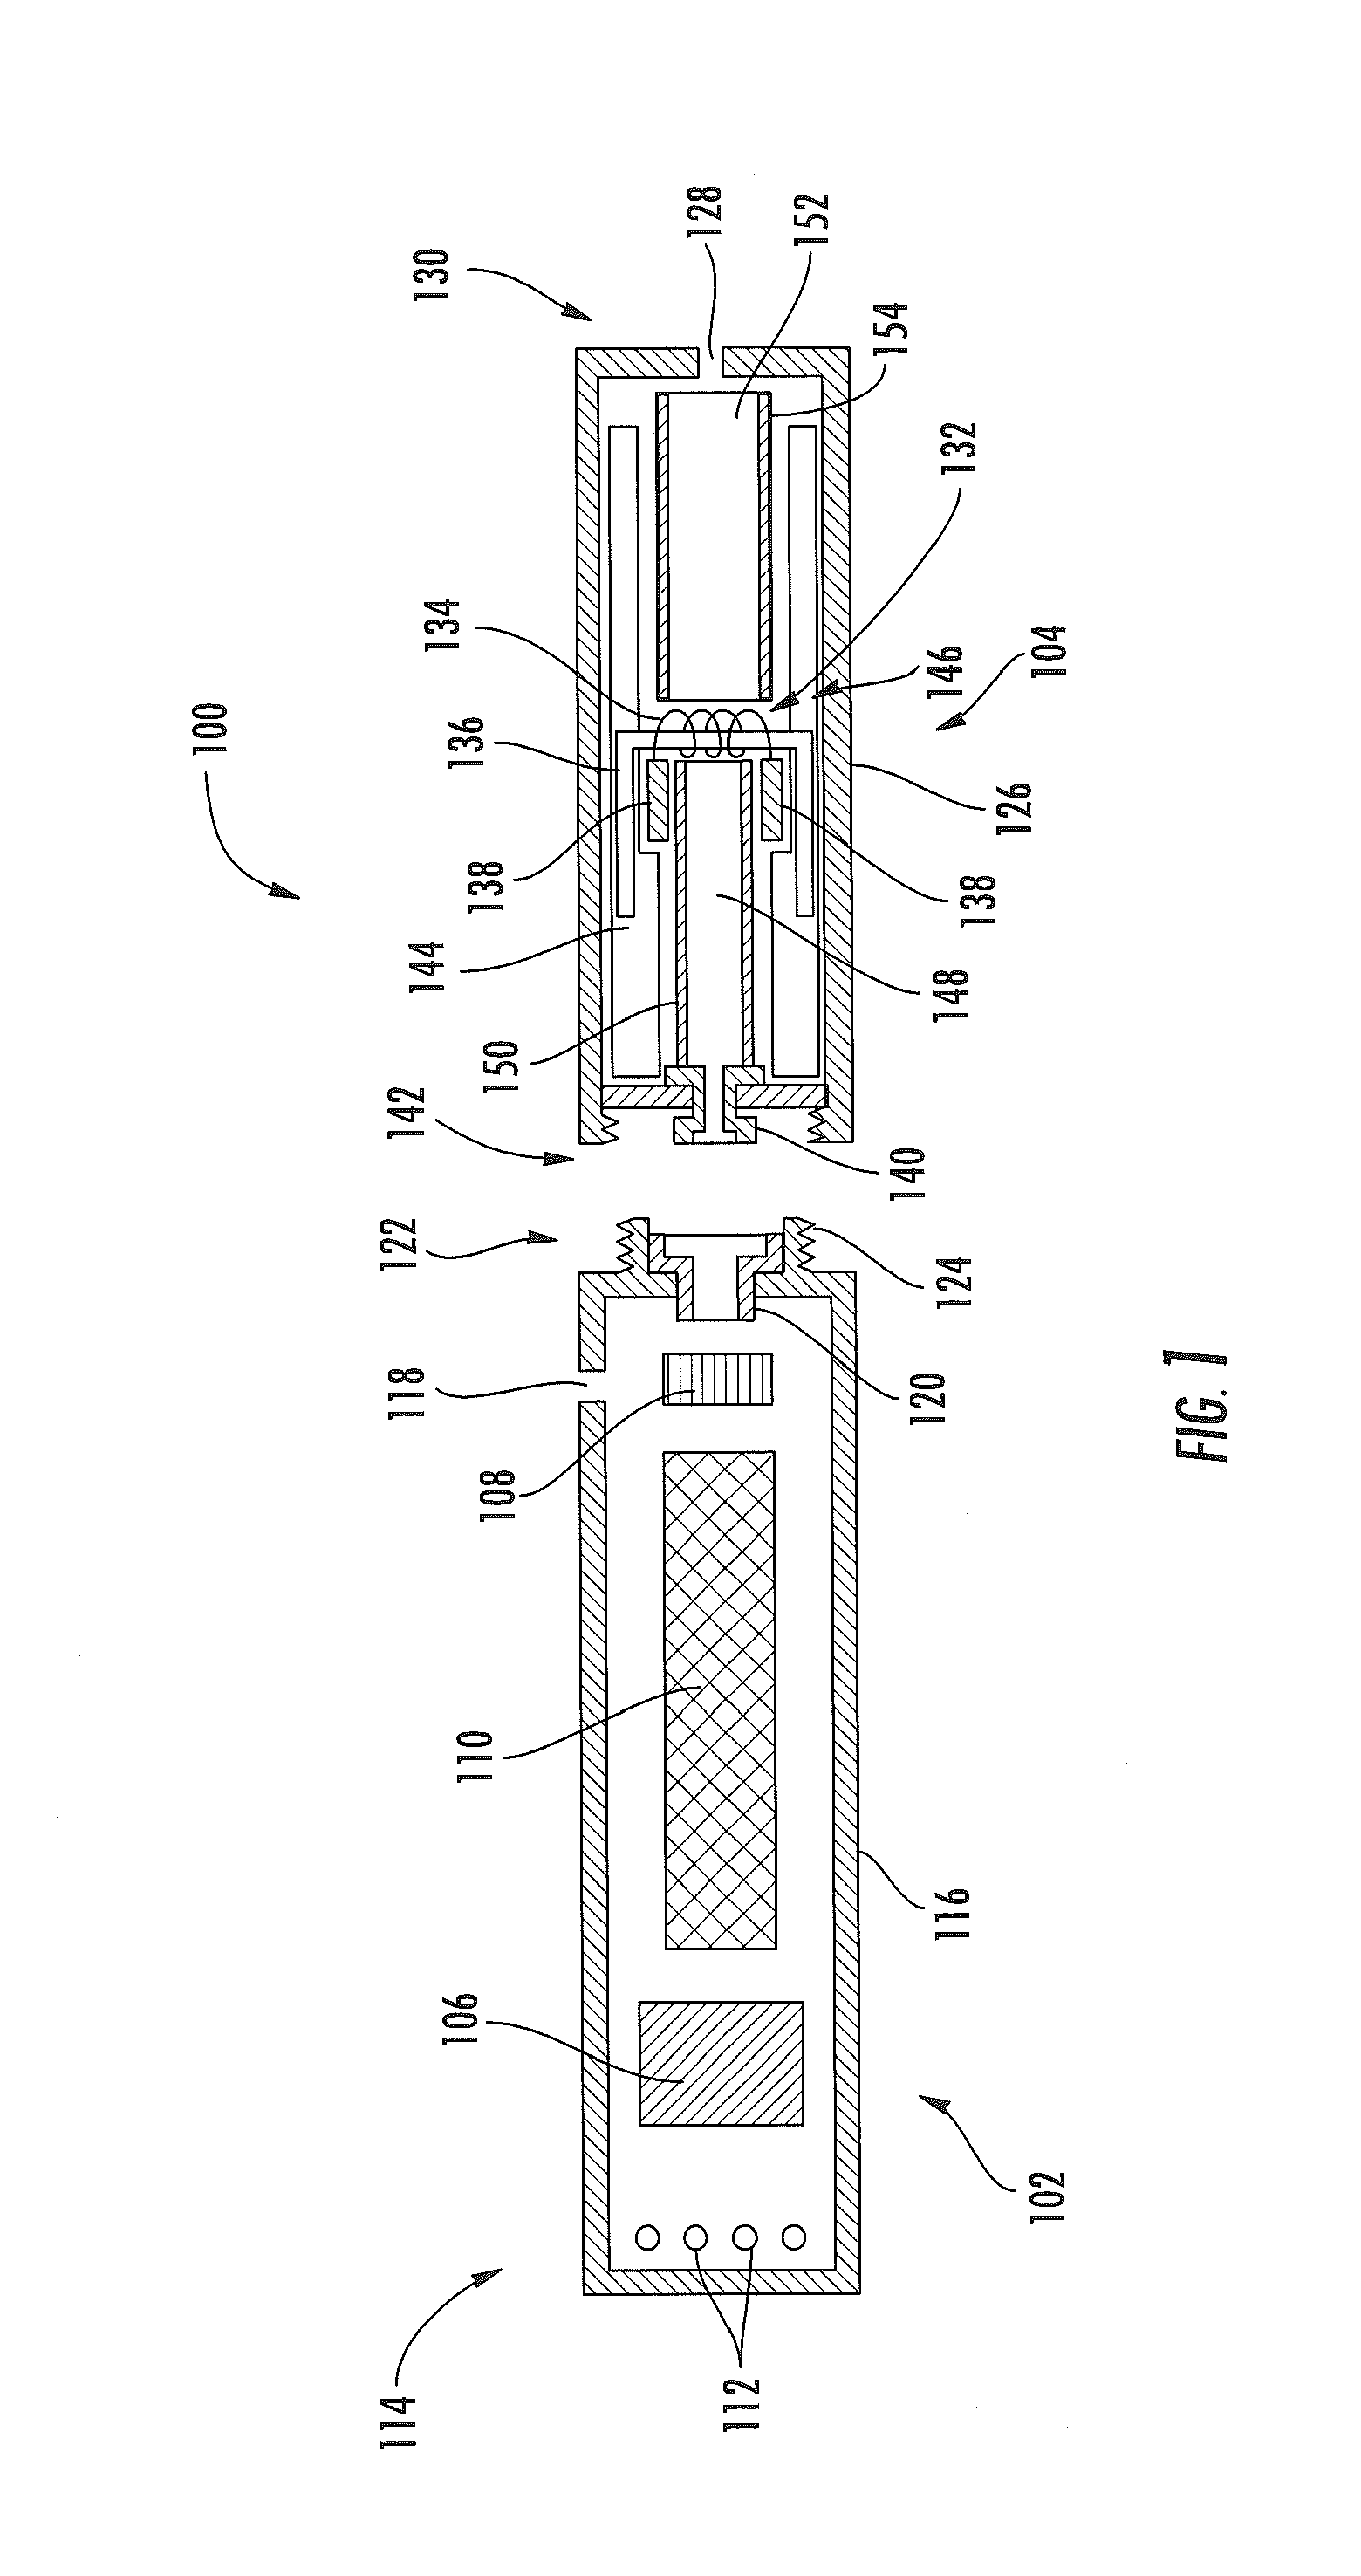 Heating elements formed from a sheet of a material and inputs and methods for the production of atomizers